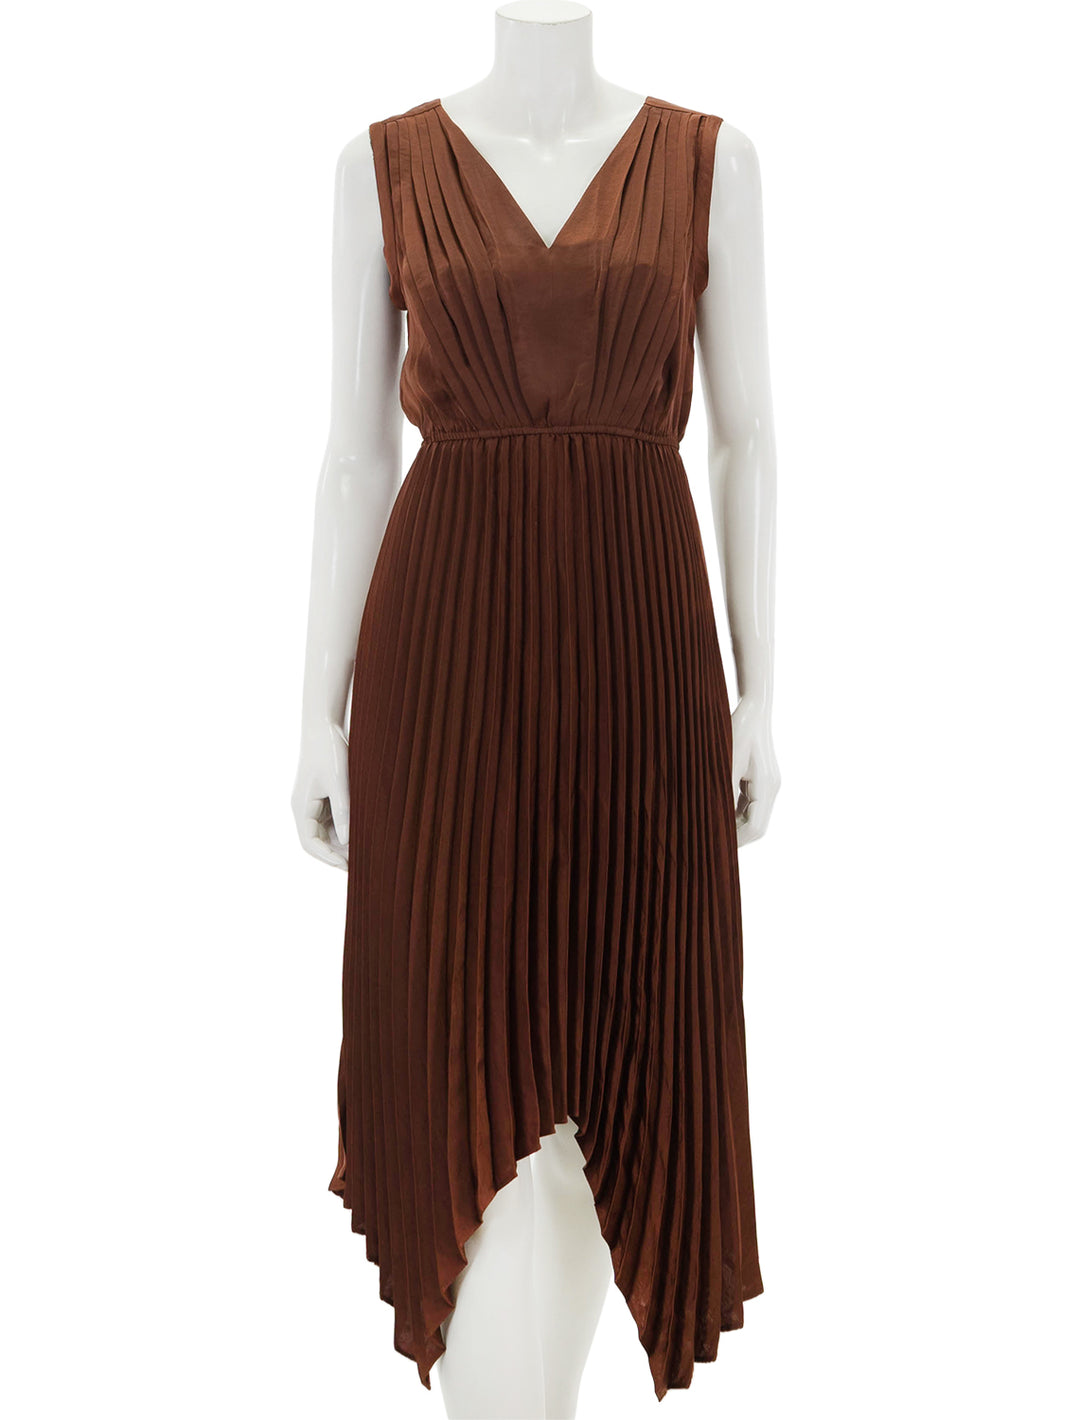 Front view of Steve Madden's donna dress in cinnamon.